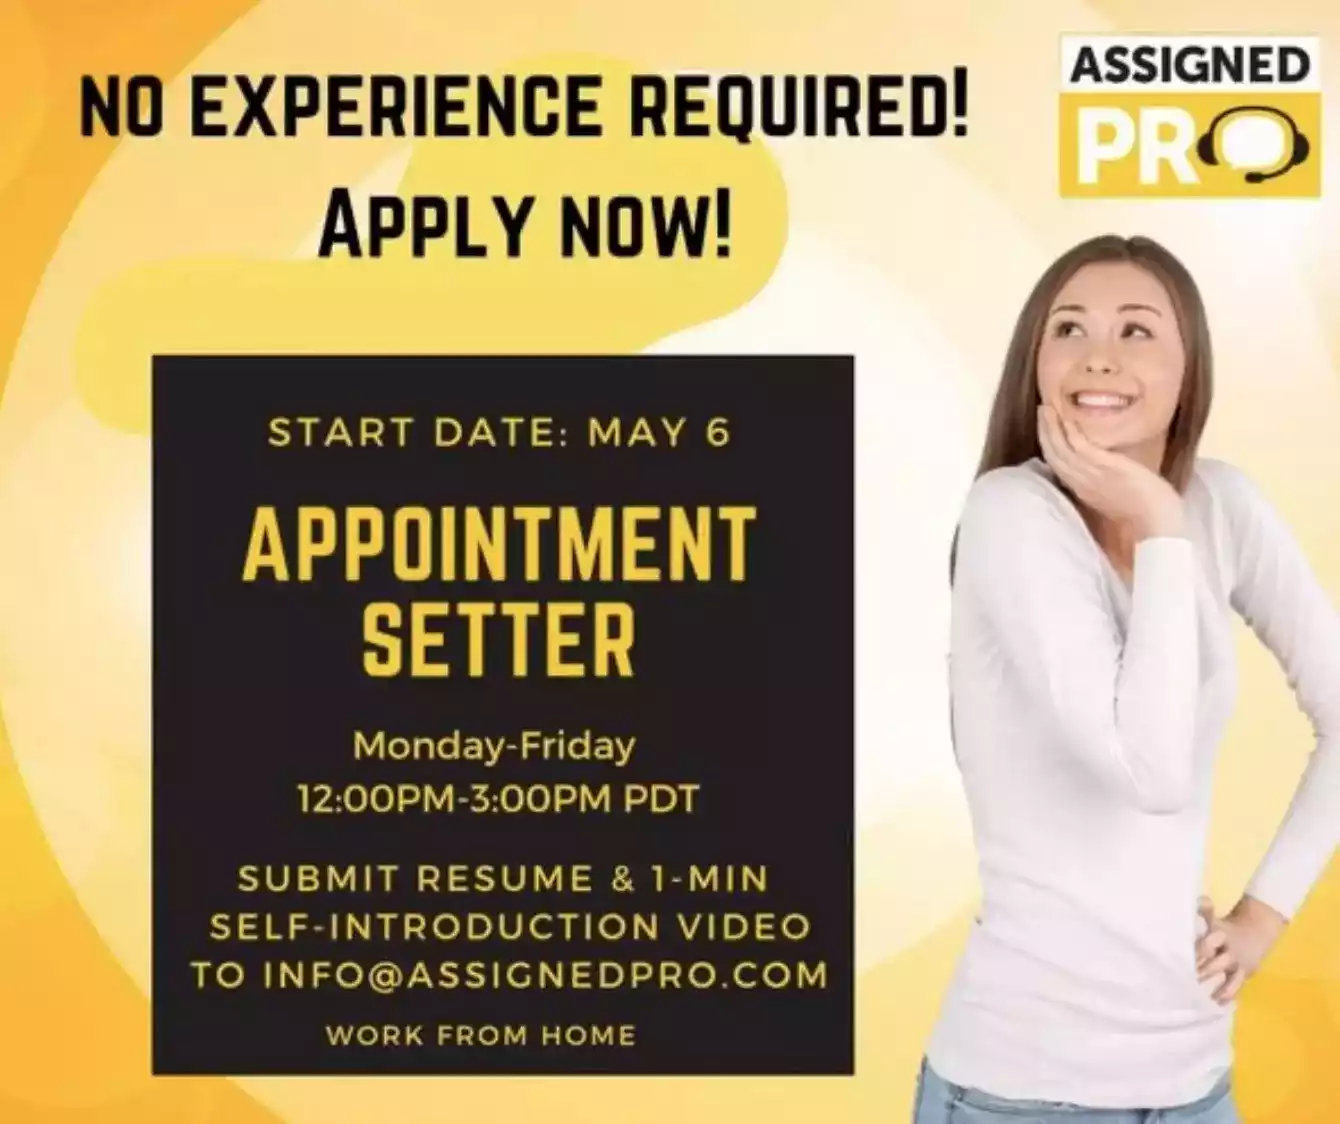 Assigned Pro is looking for a motivated Appointment Setter to join our team by contacting prospective clients via phone